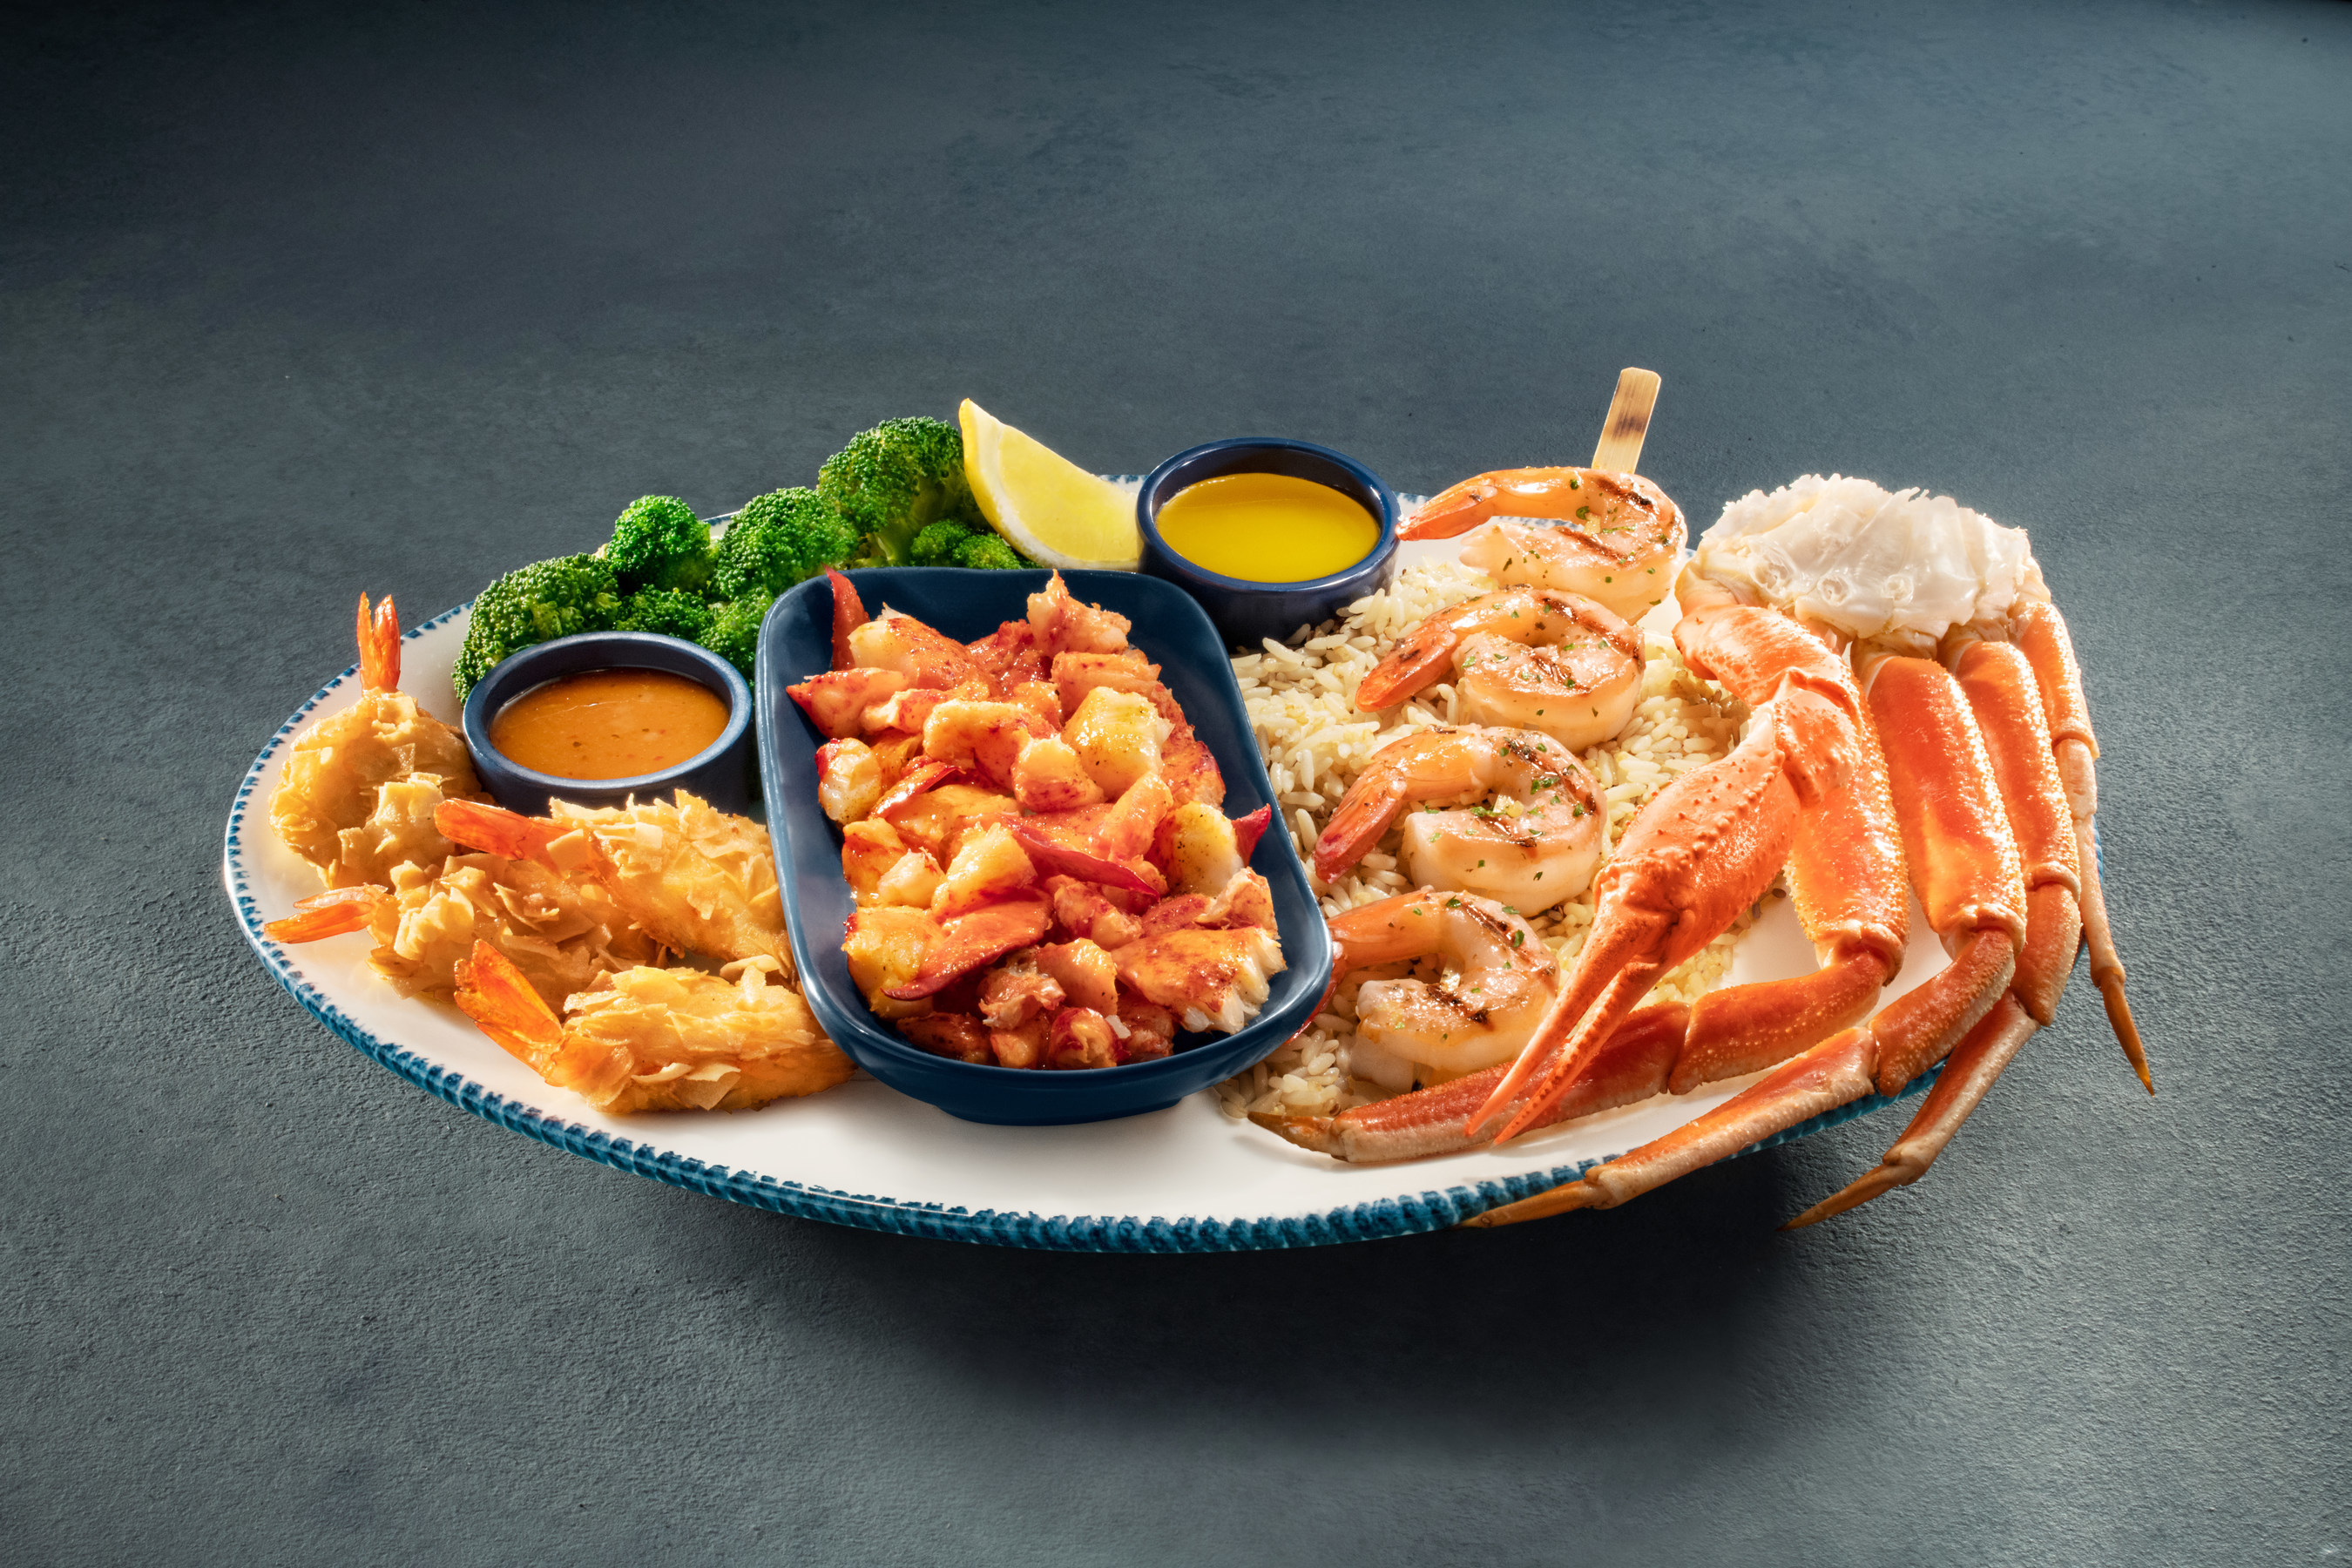 Red Lobster Celebrates The Holidays With The Return Of Create Your Own Ultimate Feast